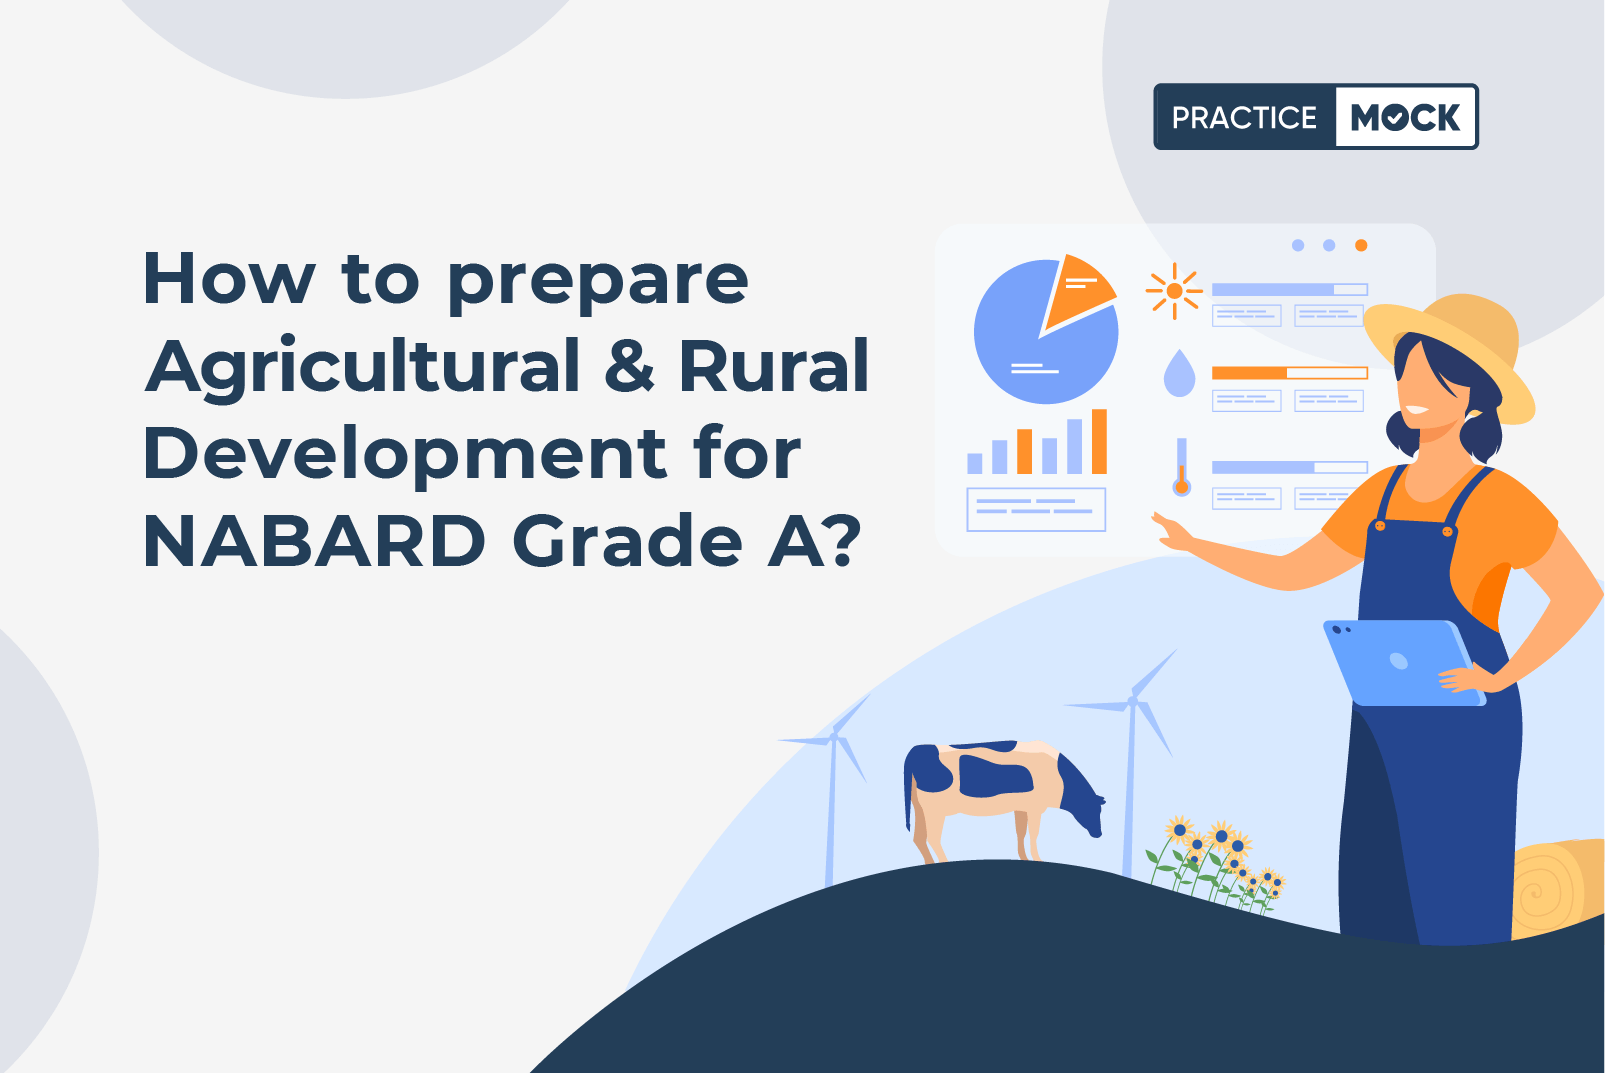 How to prepare Agricultural & Rural Development for NABARD Grade A